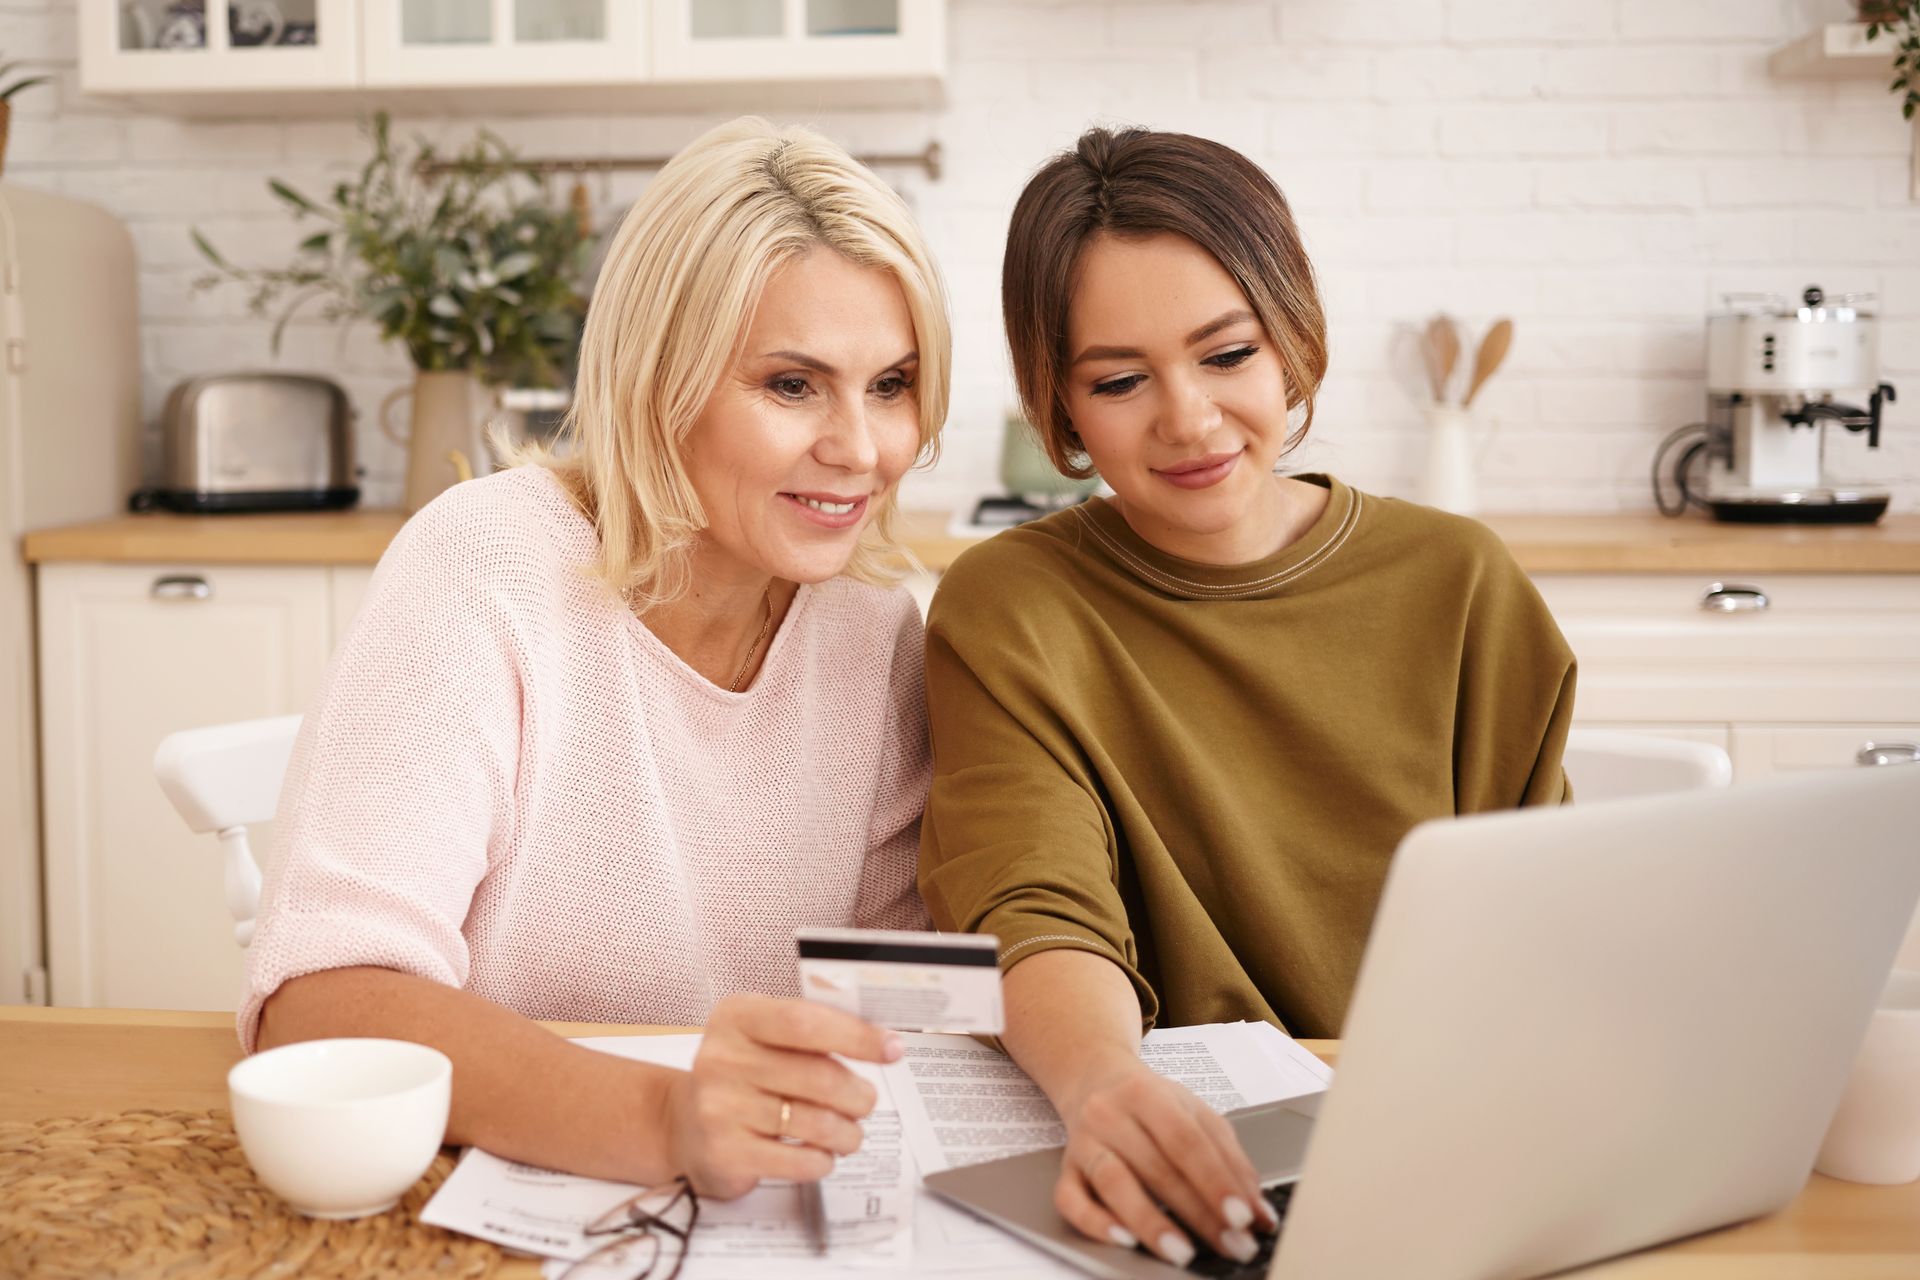 women smiling at computer with payment card